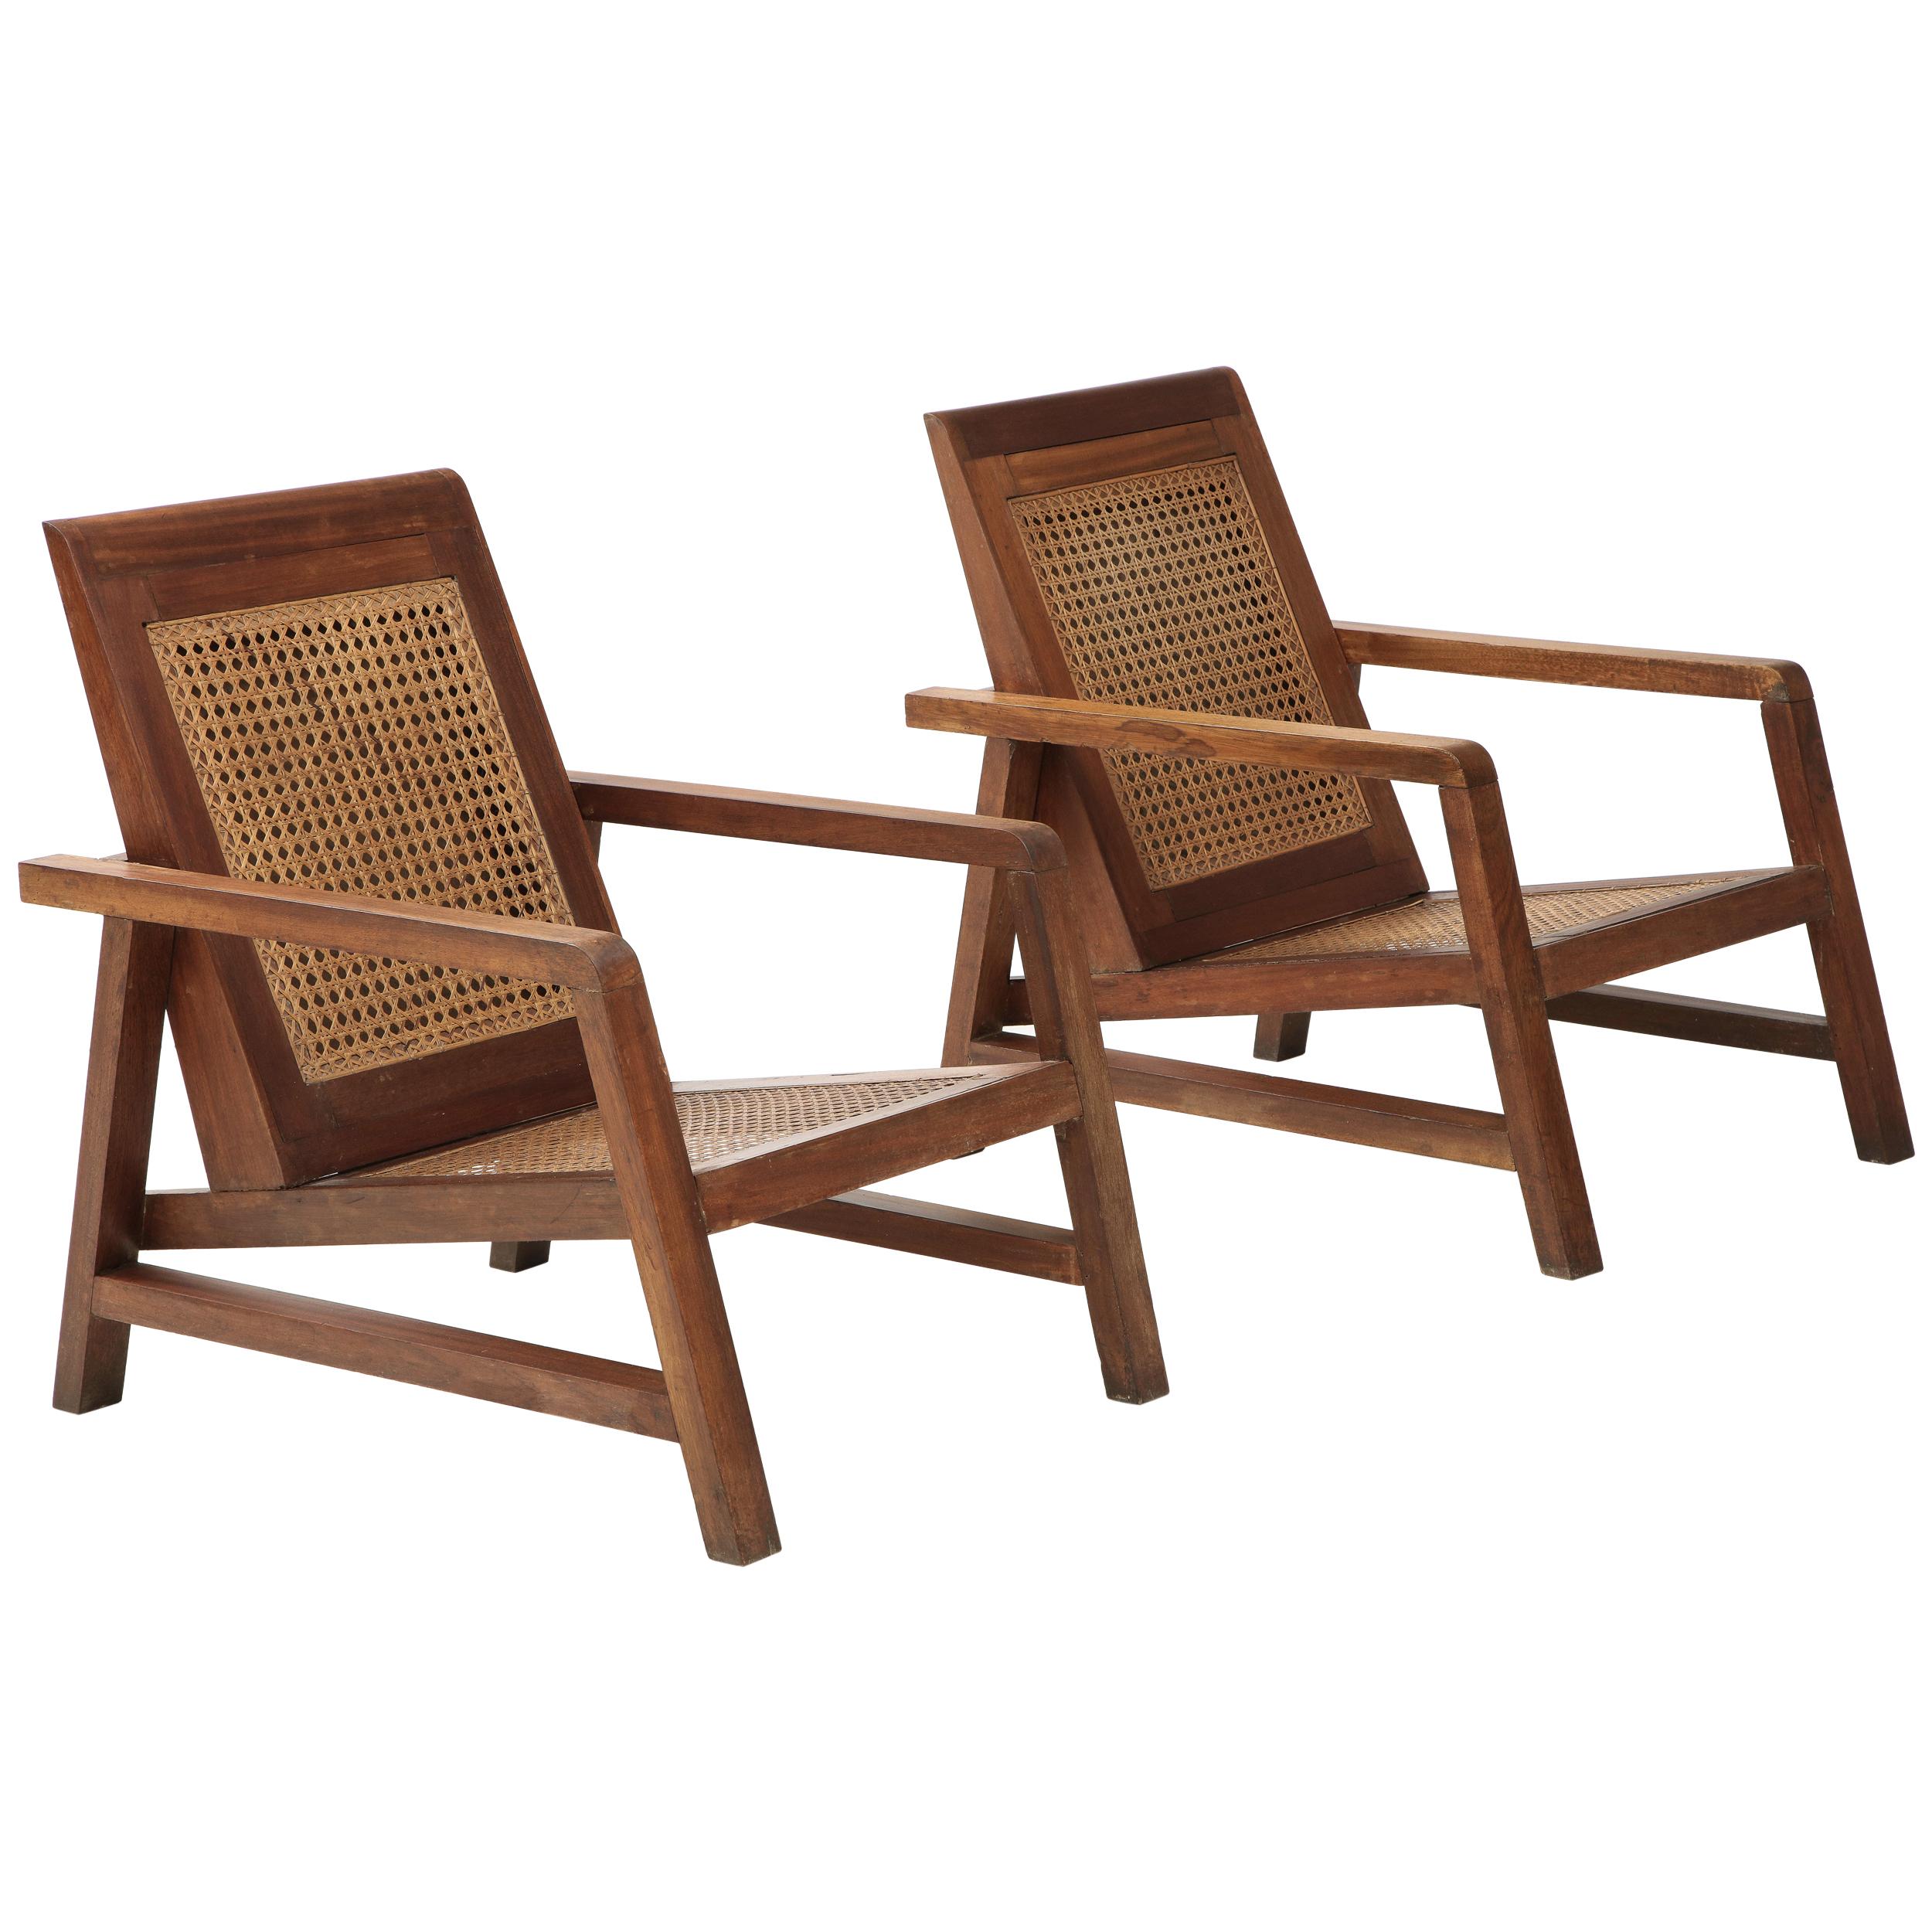 Pair of Modernist Period Pierre Jeanneret Style Chairs, France, c. 1950